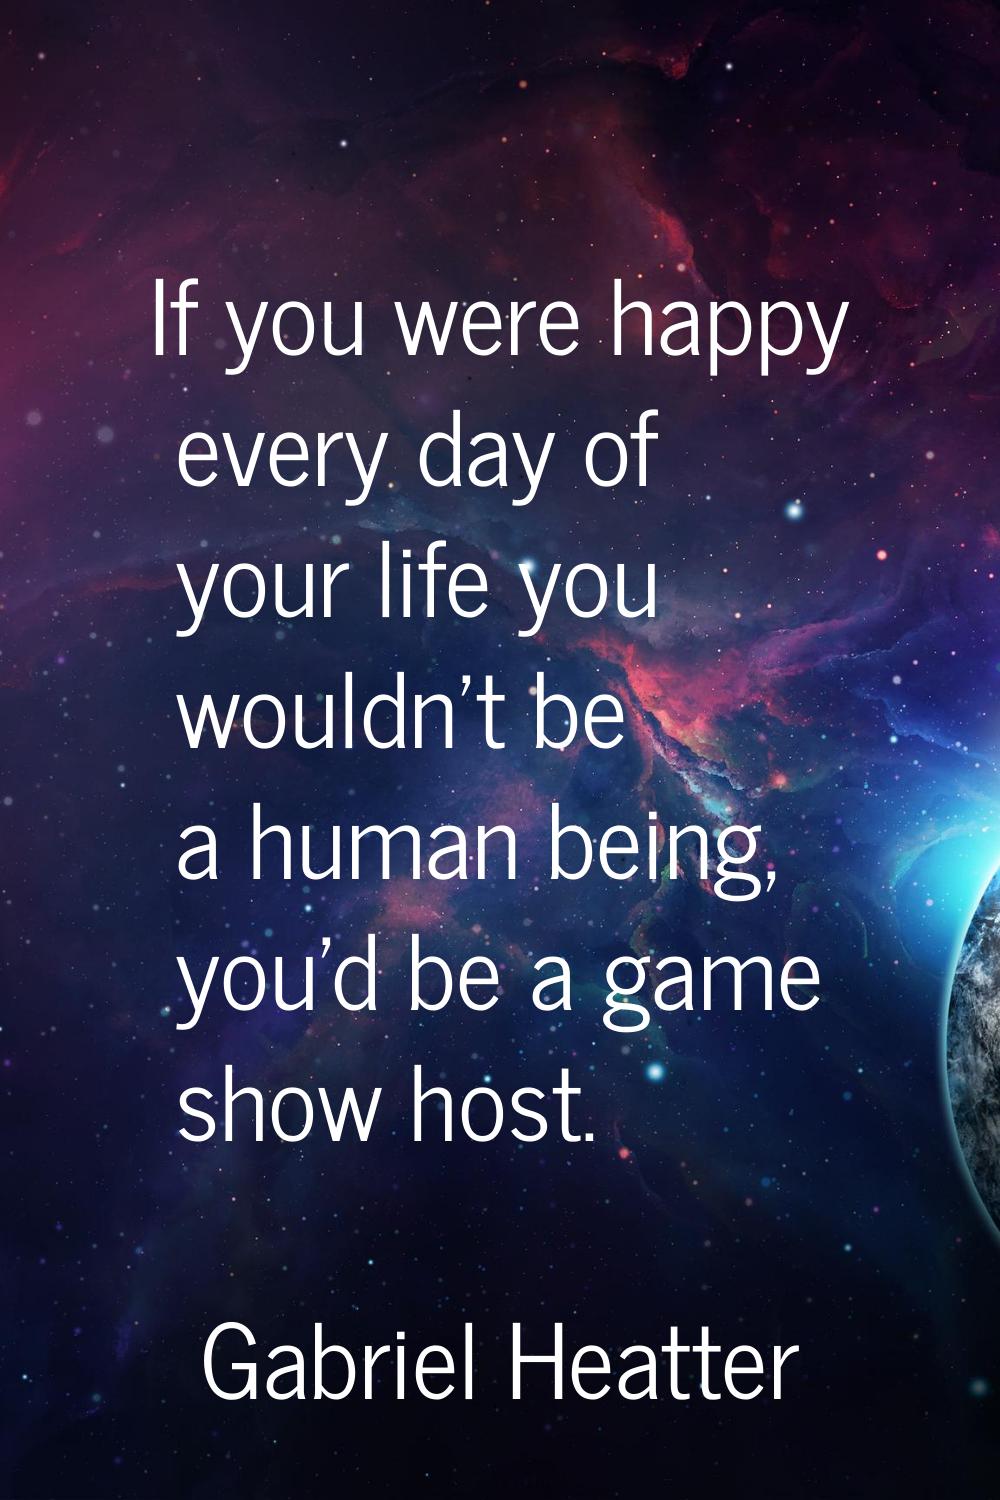 If you were happy every day of your life you wouldn't be a human being, you'd be a game show host.